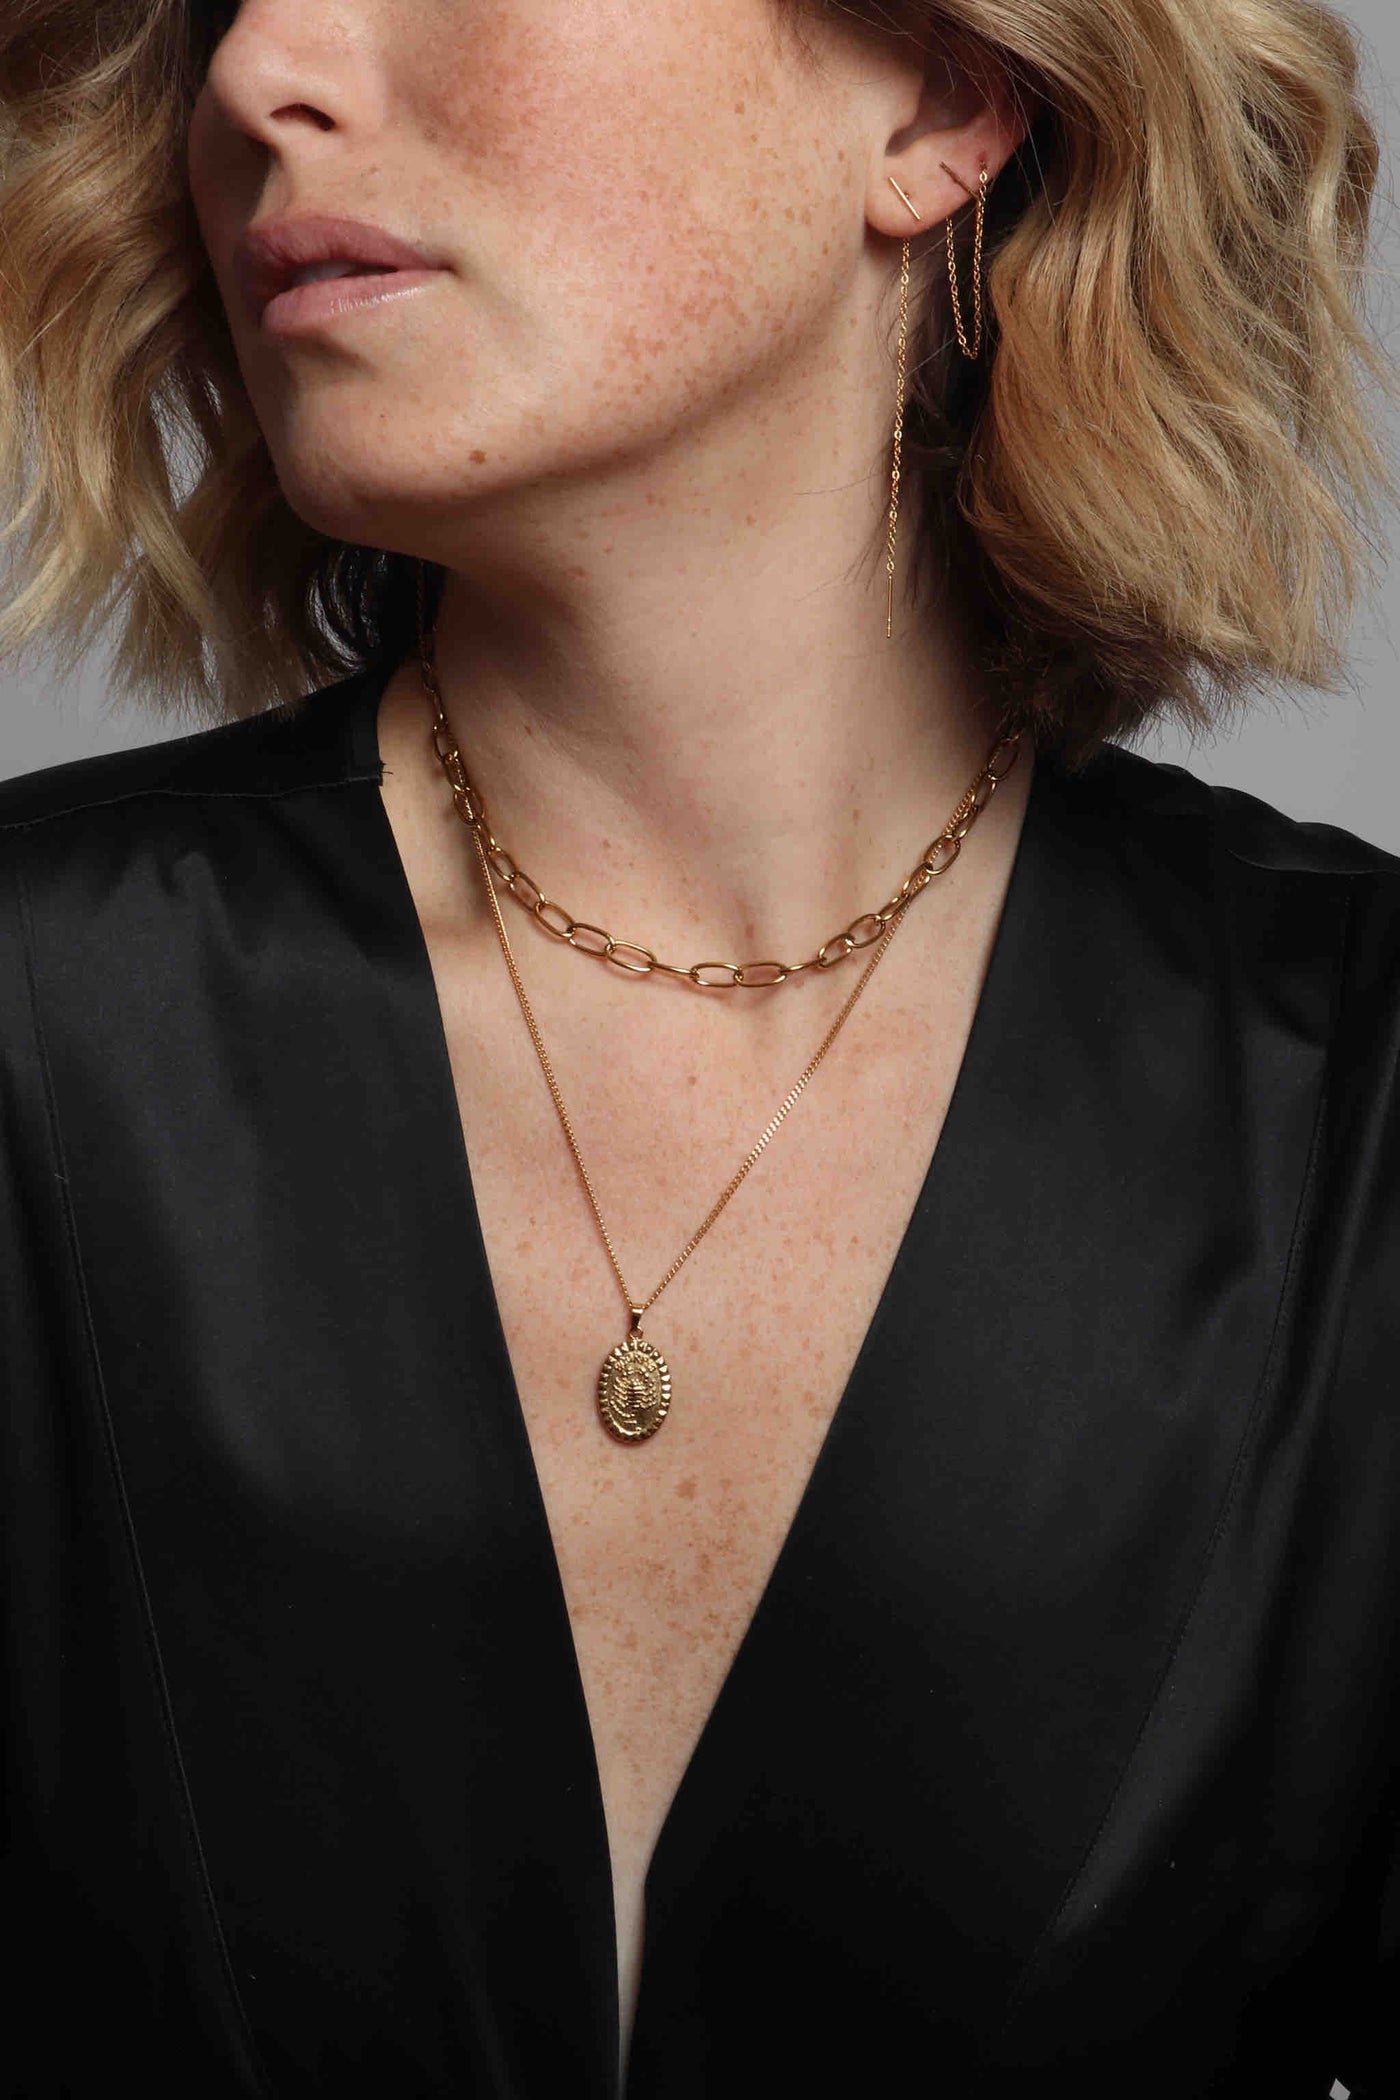 Delicate 14k gold plated stainless steel jewelry by Marrin Costello, featuring our bar and chain Nile threader earrings, oval link adjustable Anita Choker, and hand carved oval zodiac pendant with our signature Melrose stud detail, styled with a silk robe by Third Love and a vintage belt from Recess LA